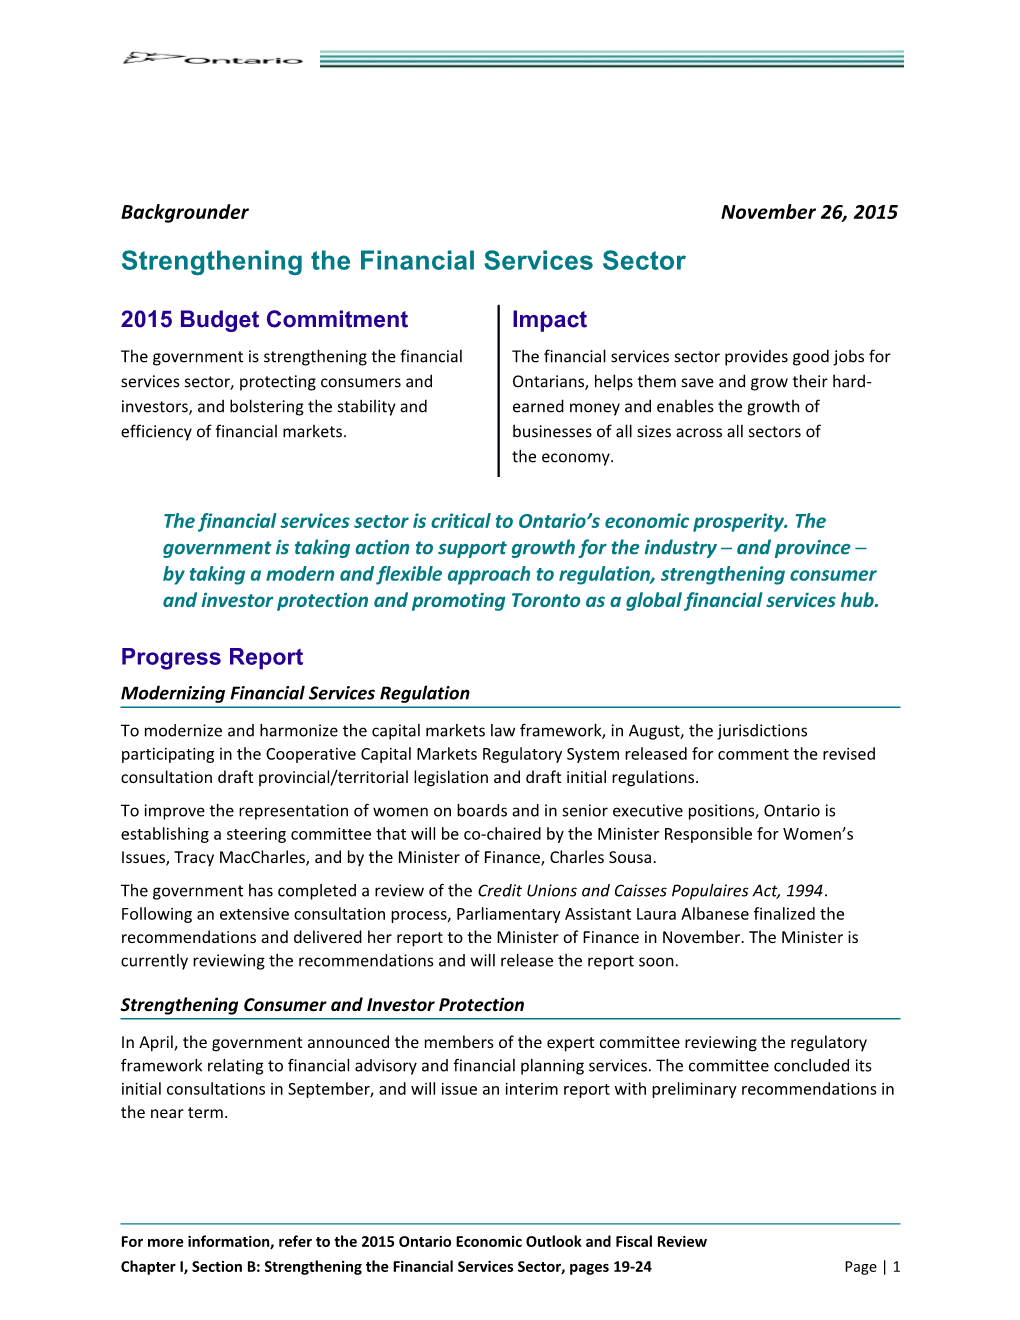 Strengthening the Financial Services Sector